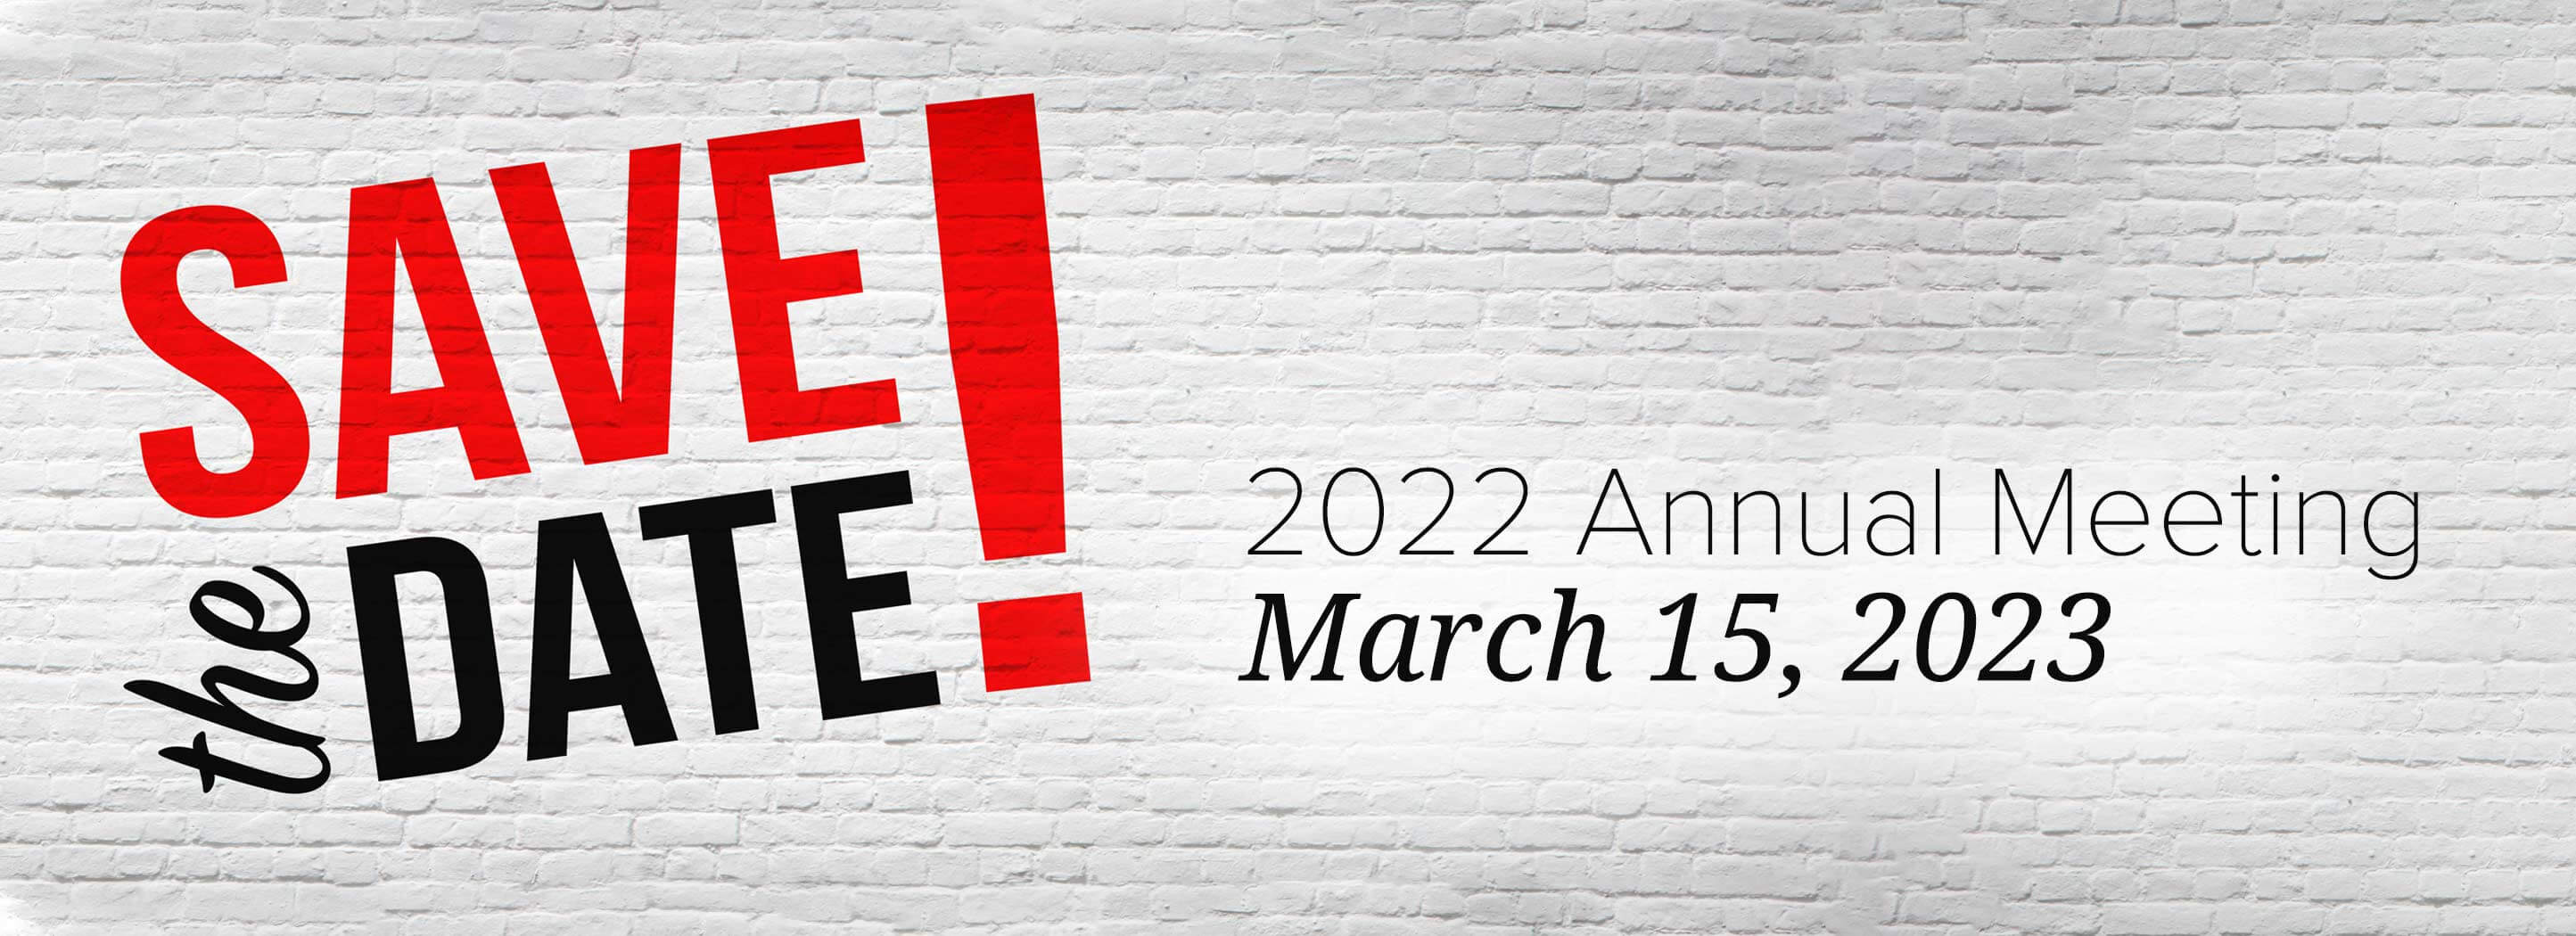 Save the date! 2022 Annual Meeting - March 15, 2023